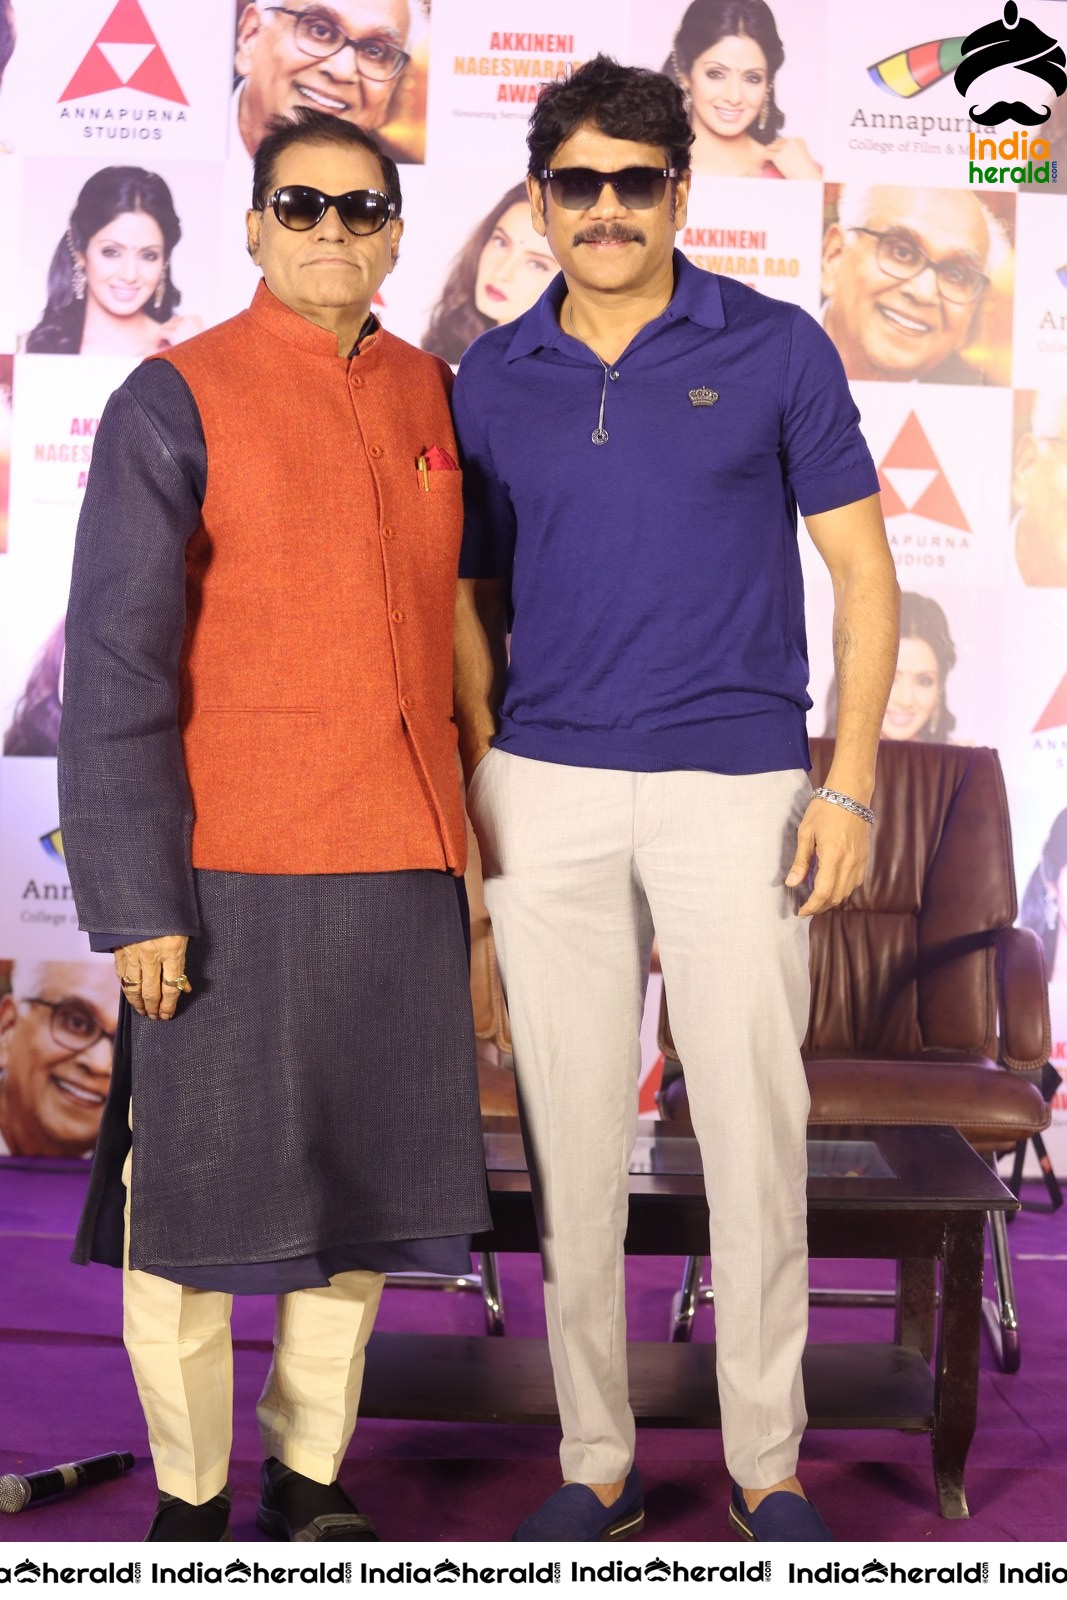 Actor Nagarjuna spotted with the Chief Guest at ANR Press Meet